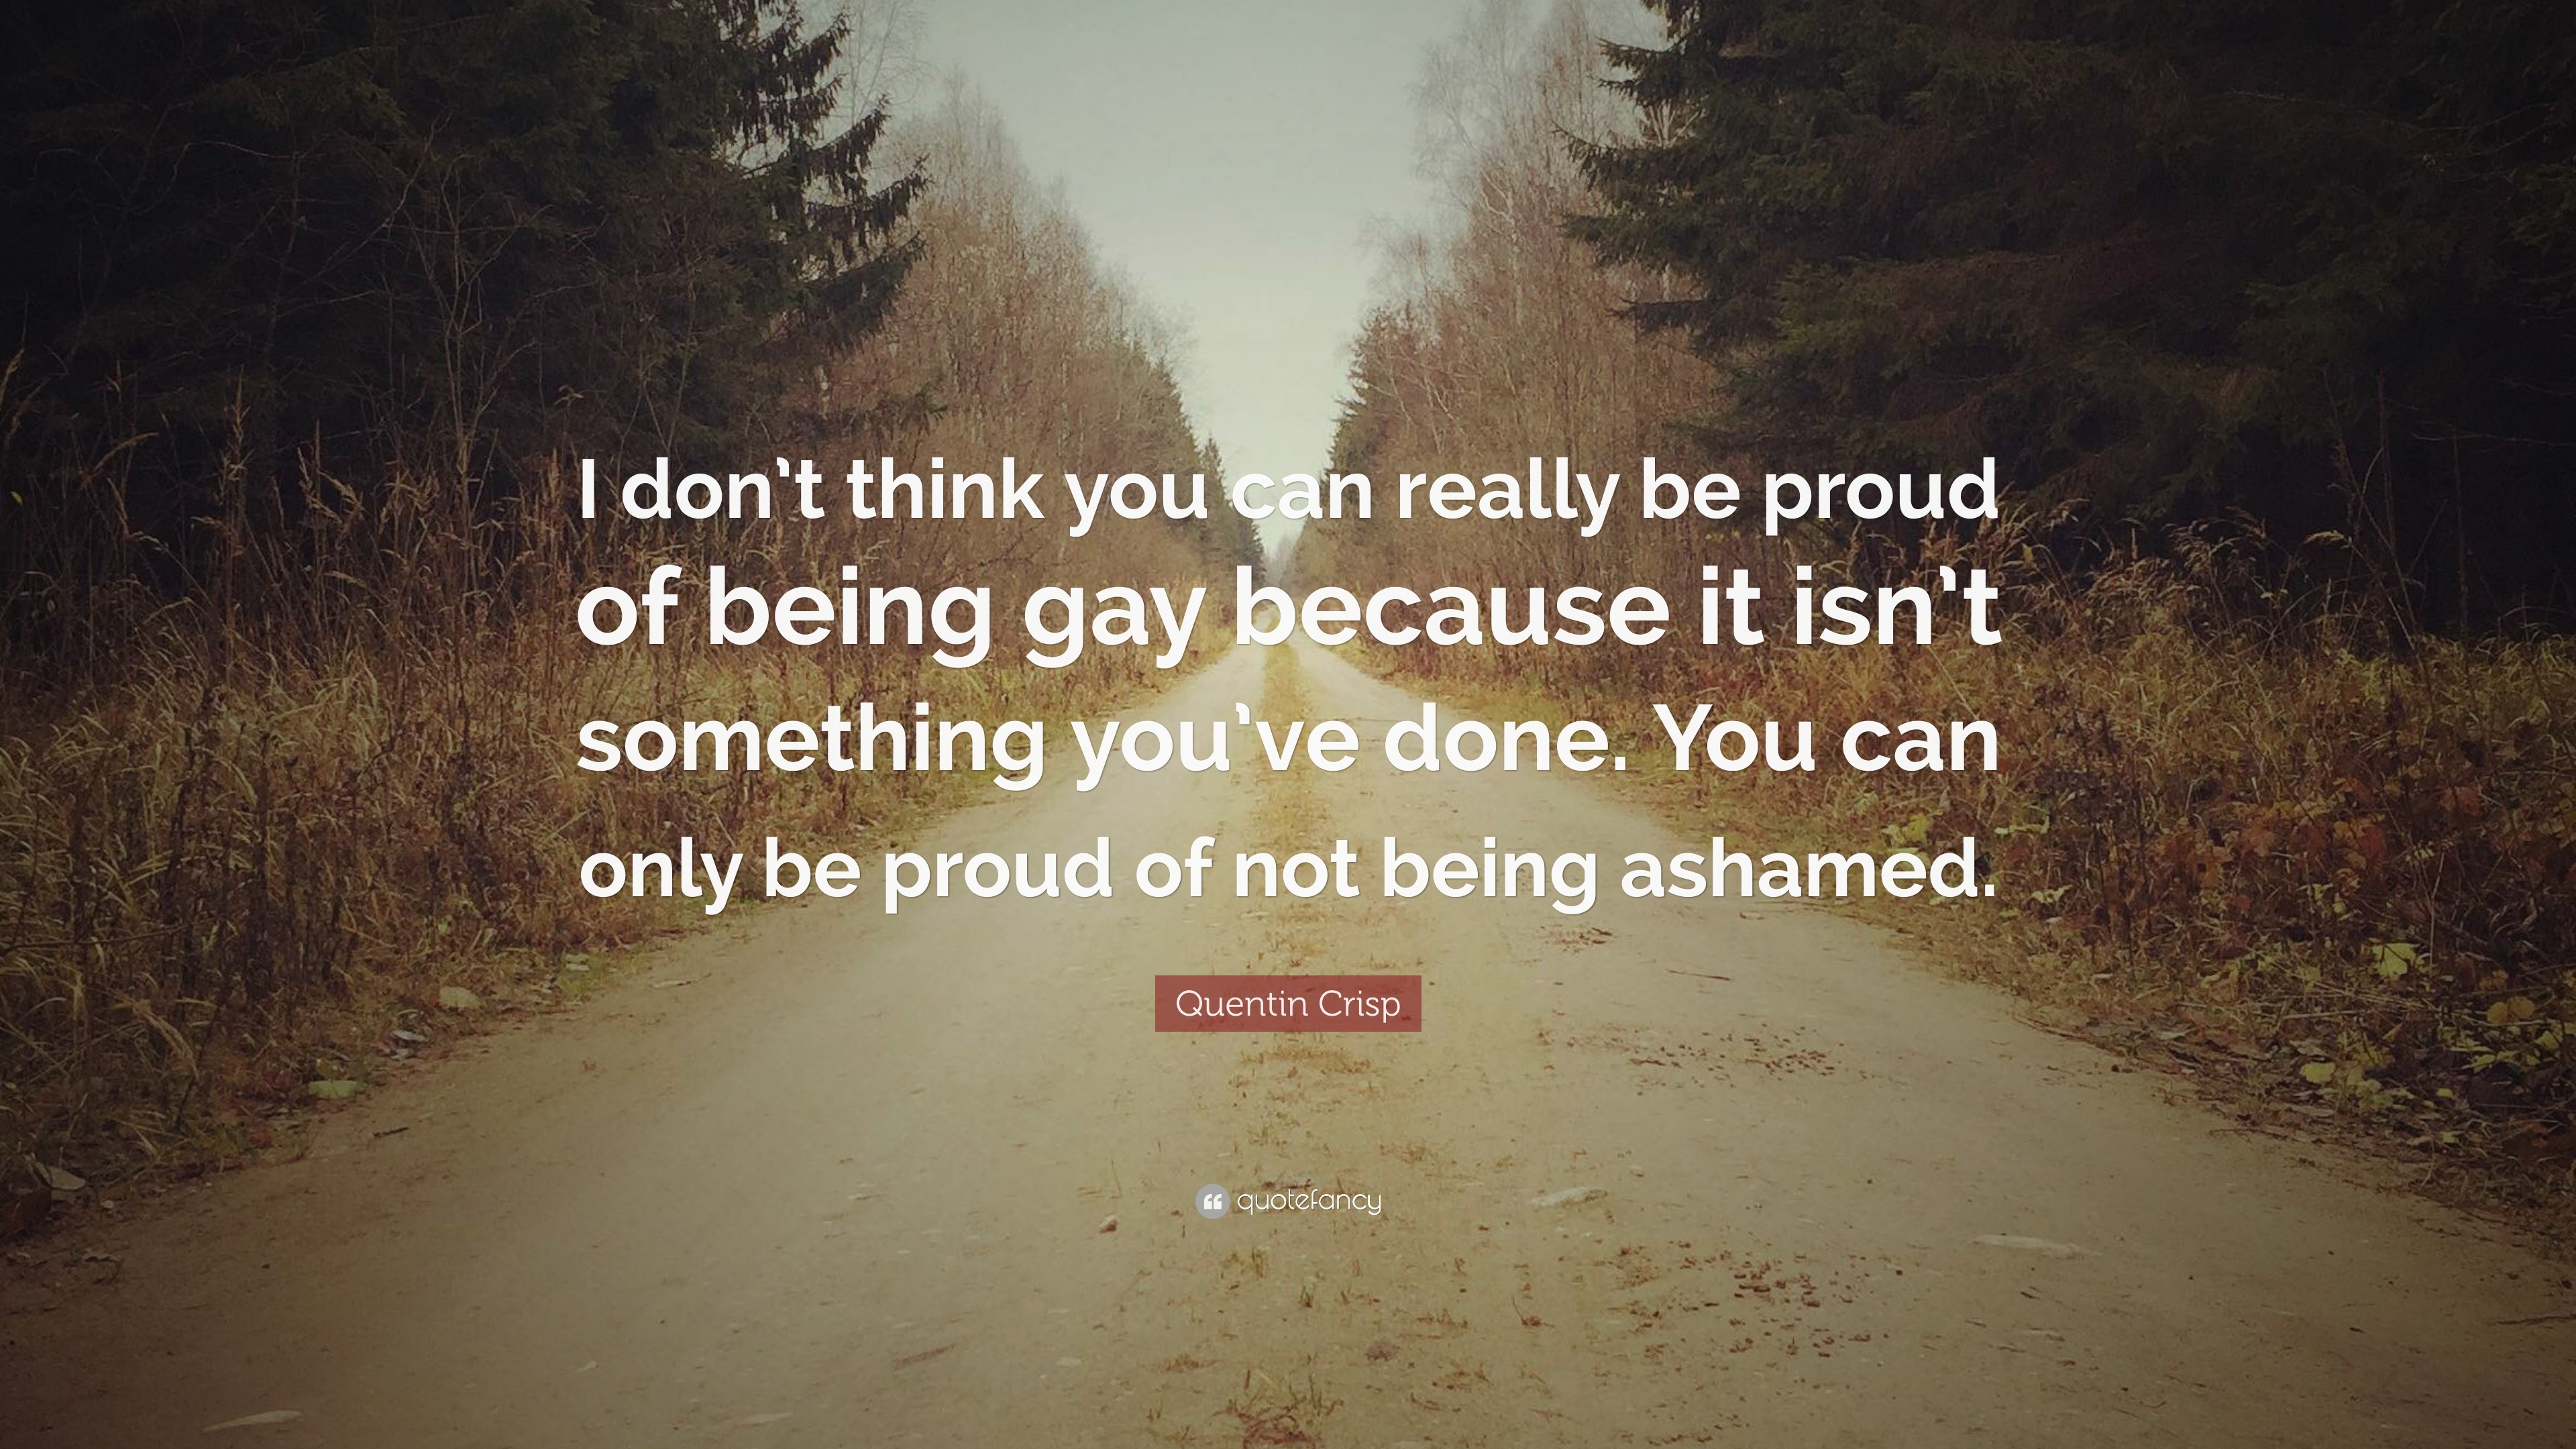 Quentin Crisp Quote: “I don’t think you can really be proud of being